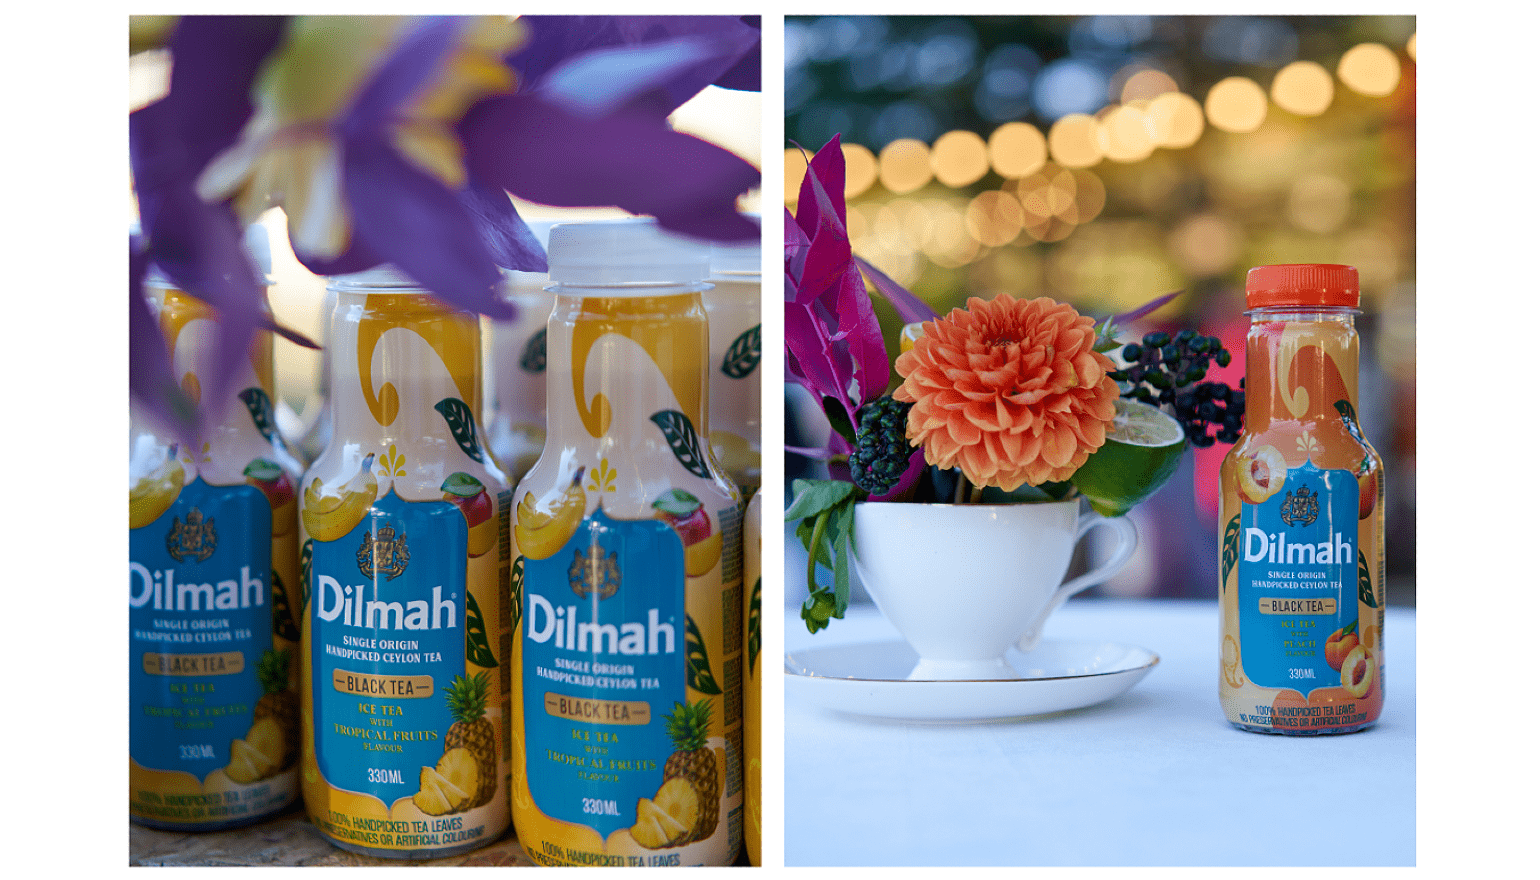 Dilmah Ice Tea makes its mark in yet another country! We’re proud to announce that...